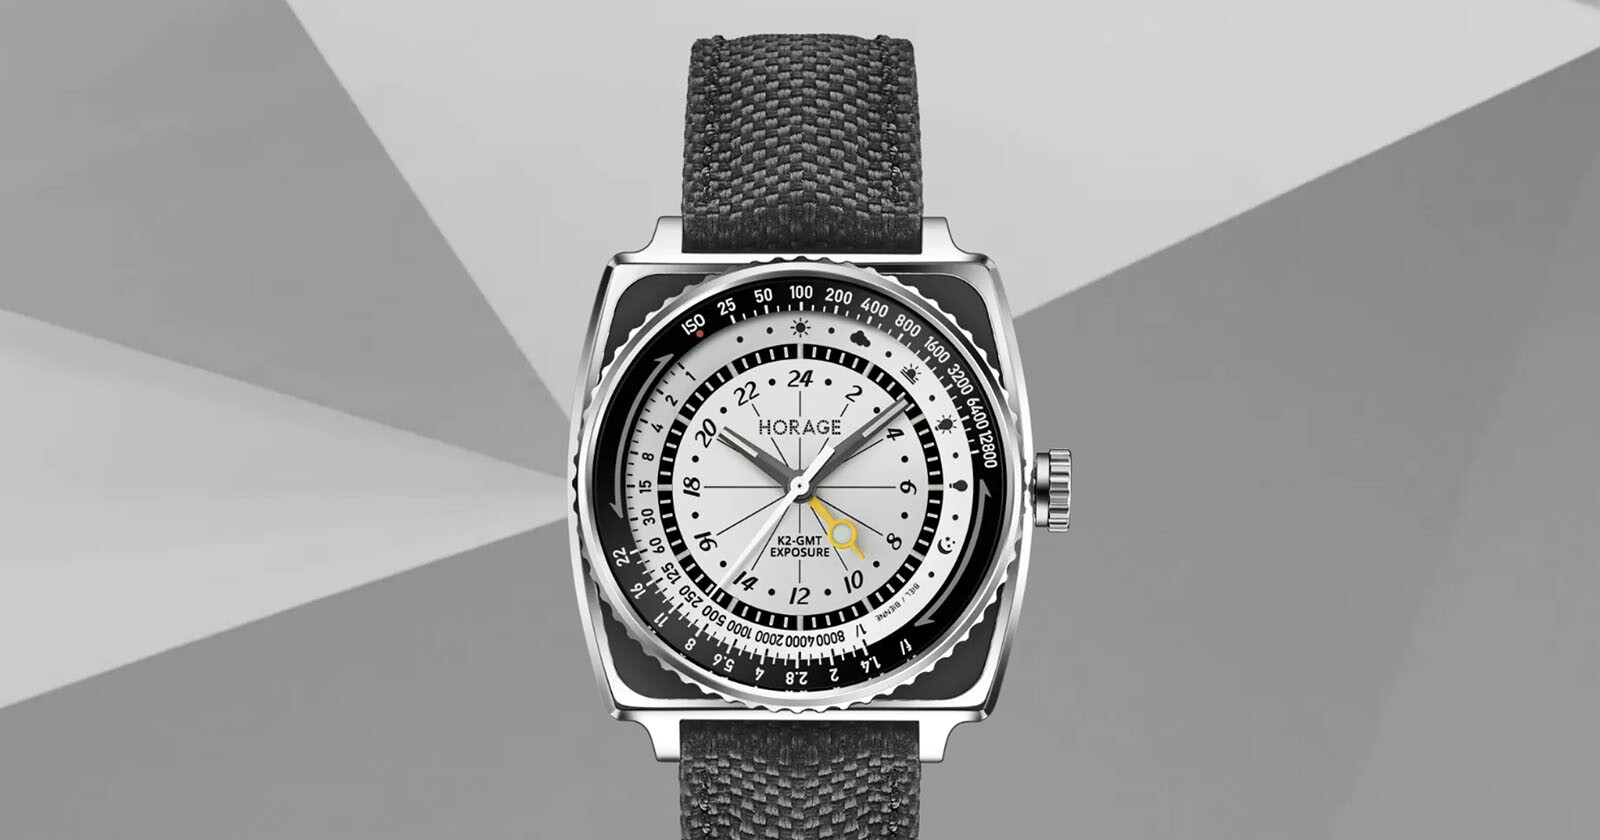 Horage Lensman 2 Exposure: A $5,500 Watch Made for Photographers